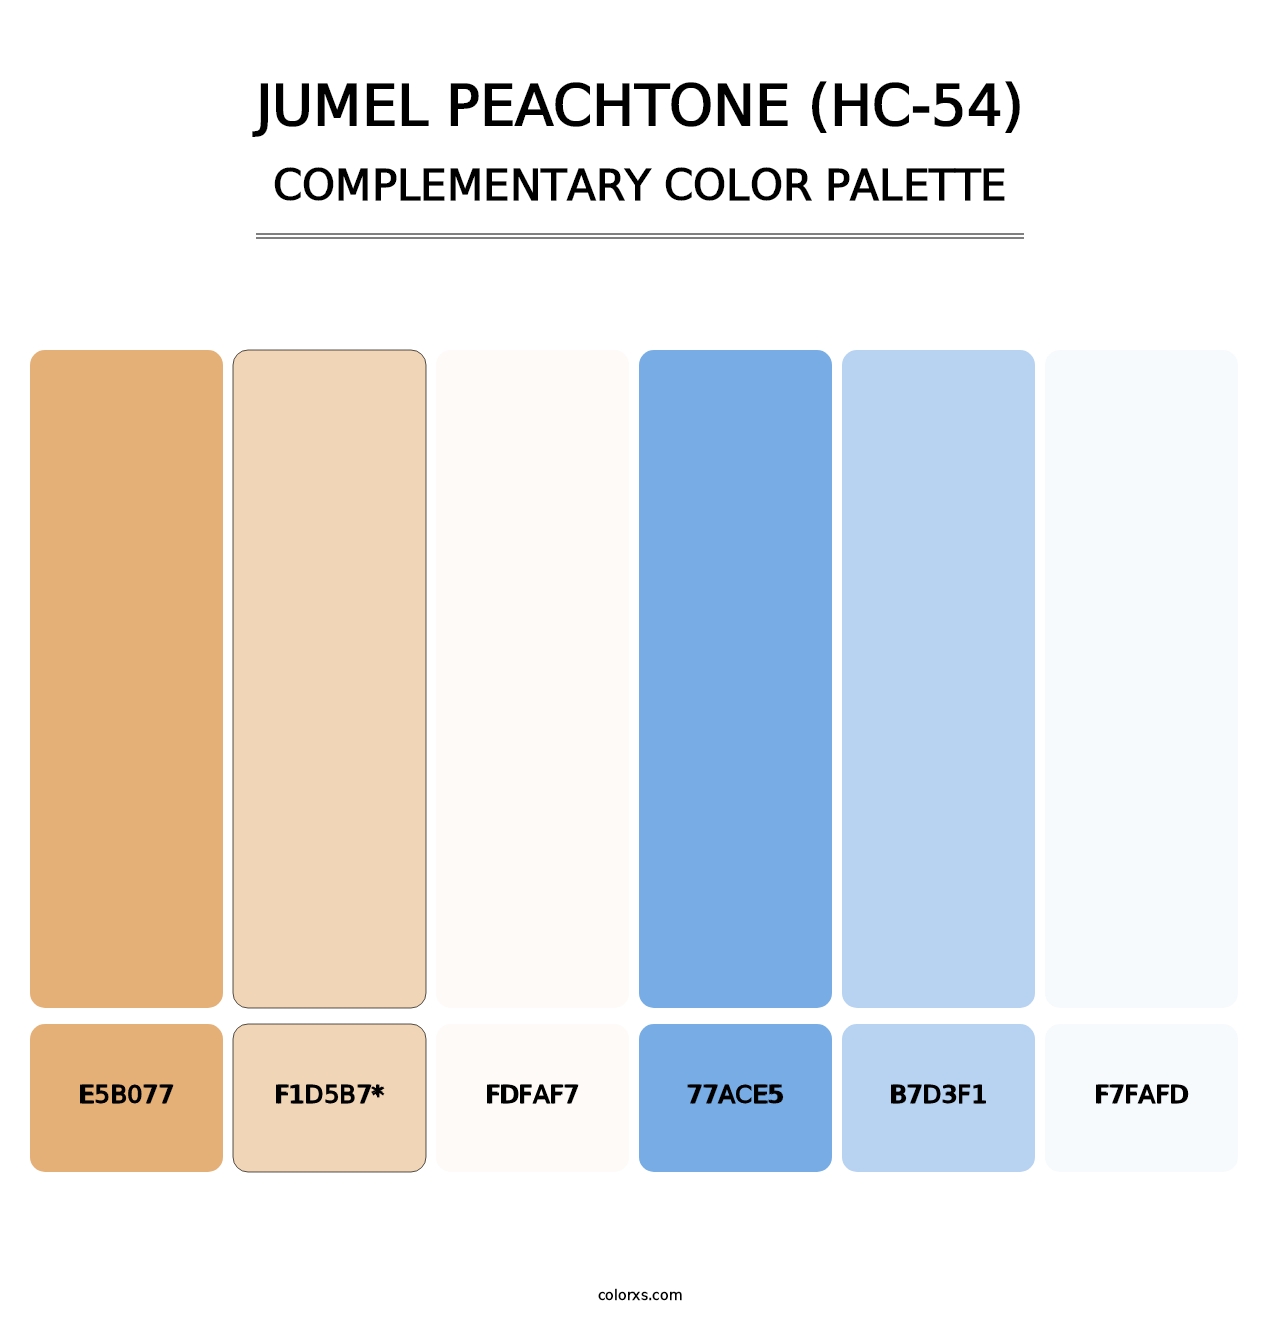 Jumel Peachtone (HC-54) - Complementary Color Palette